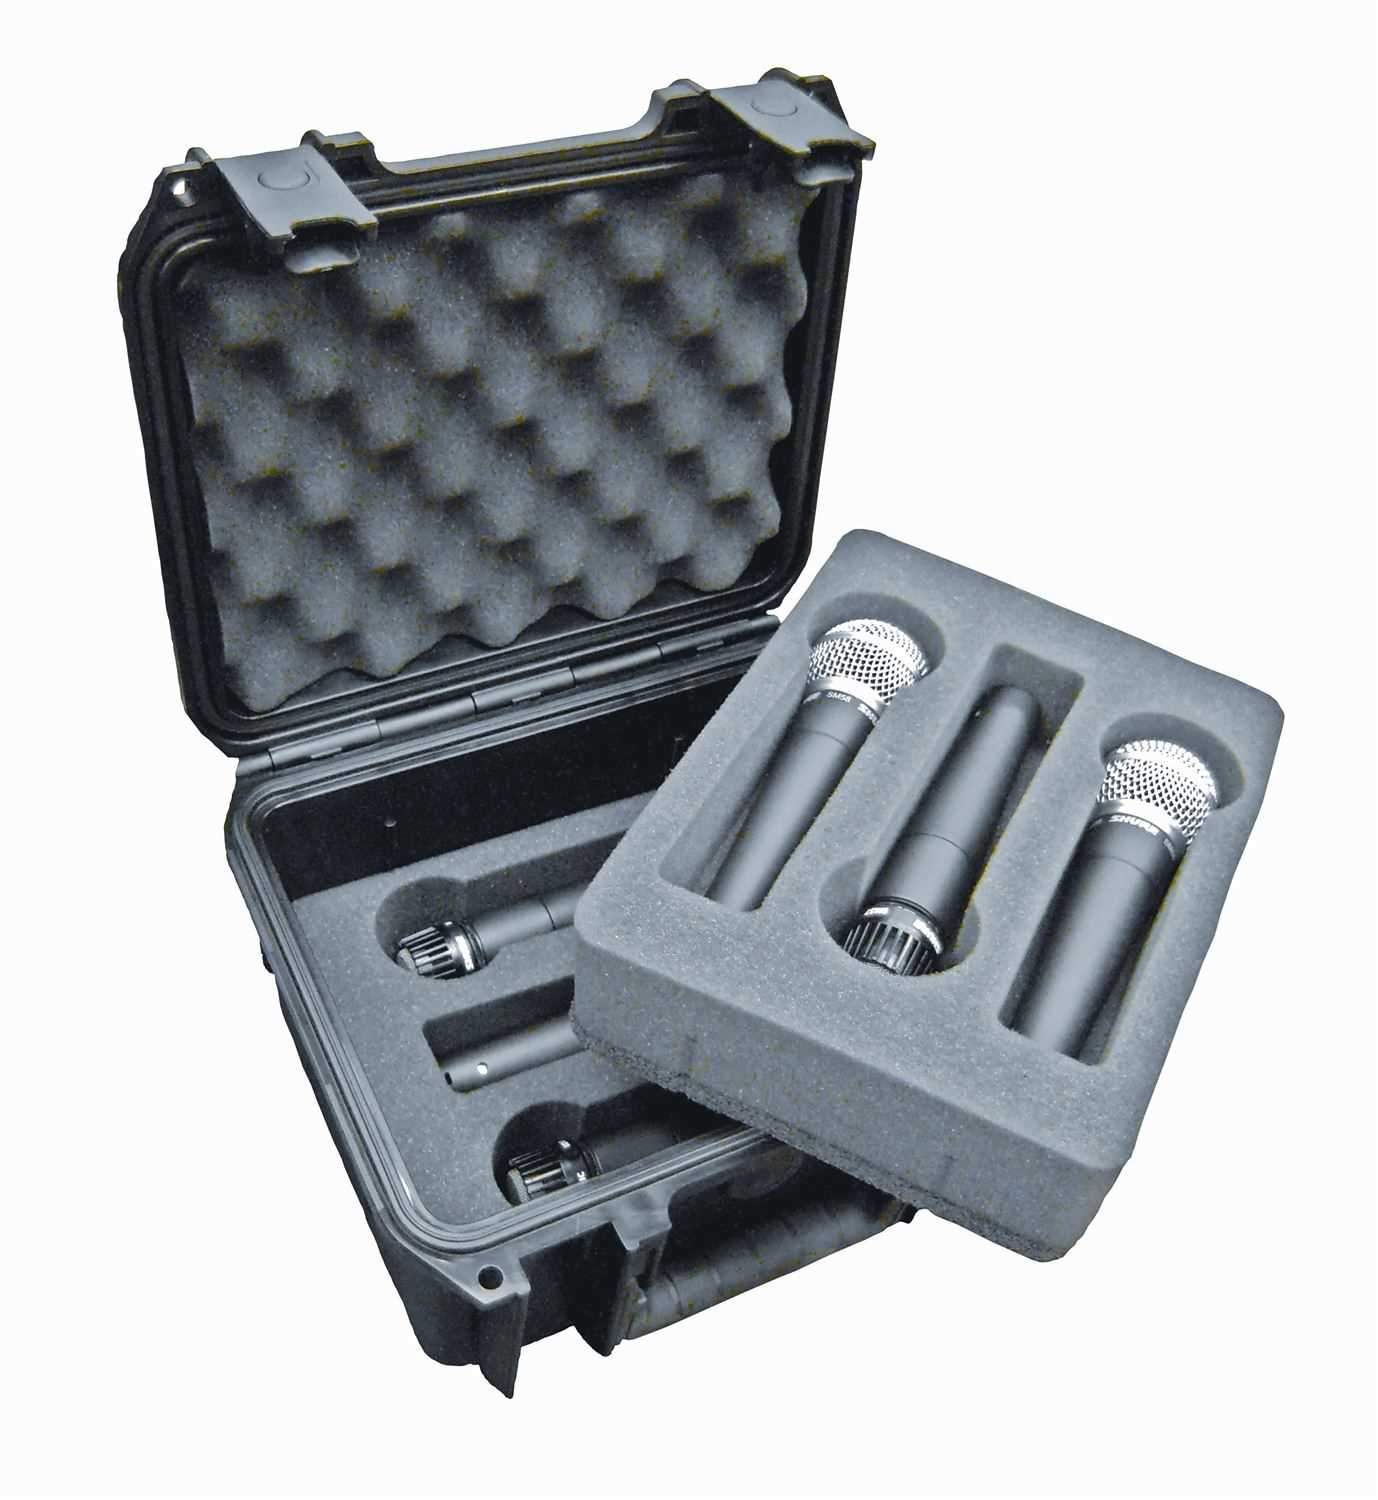 SKB Microphone Road Case Waterproof Holds 6 Mics - ProSound and Stage Lighting